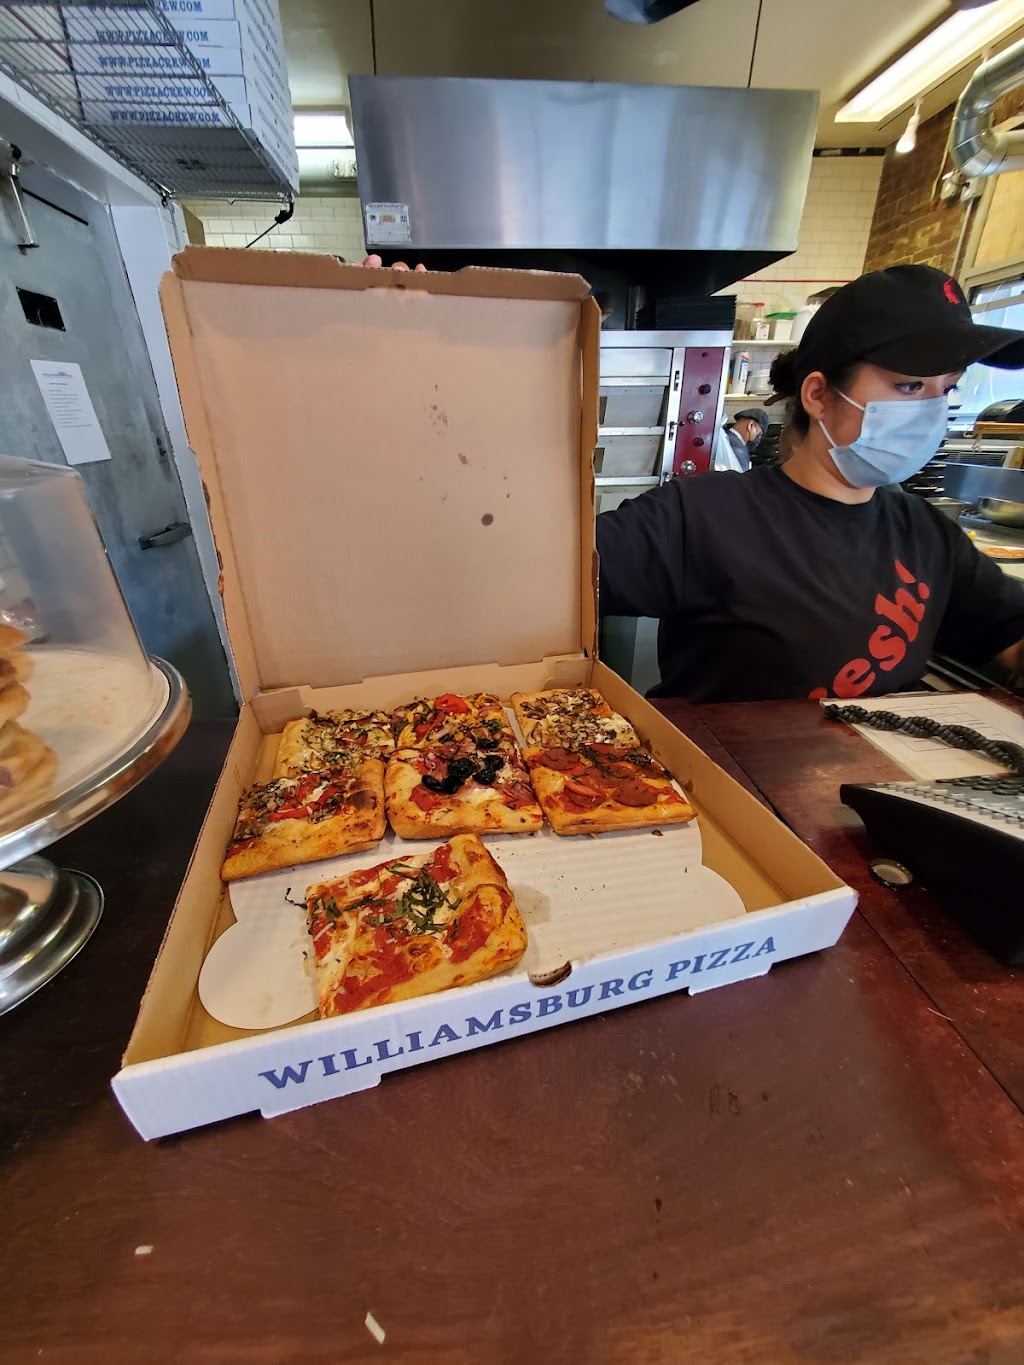 Williamsburg Pizza | meal delivery | 265 Union Ave, Brooklyn, NY 11211, USA | 7188558729 OR +1 718-855-8729